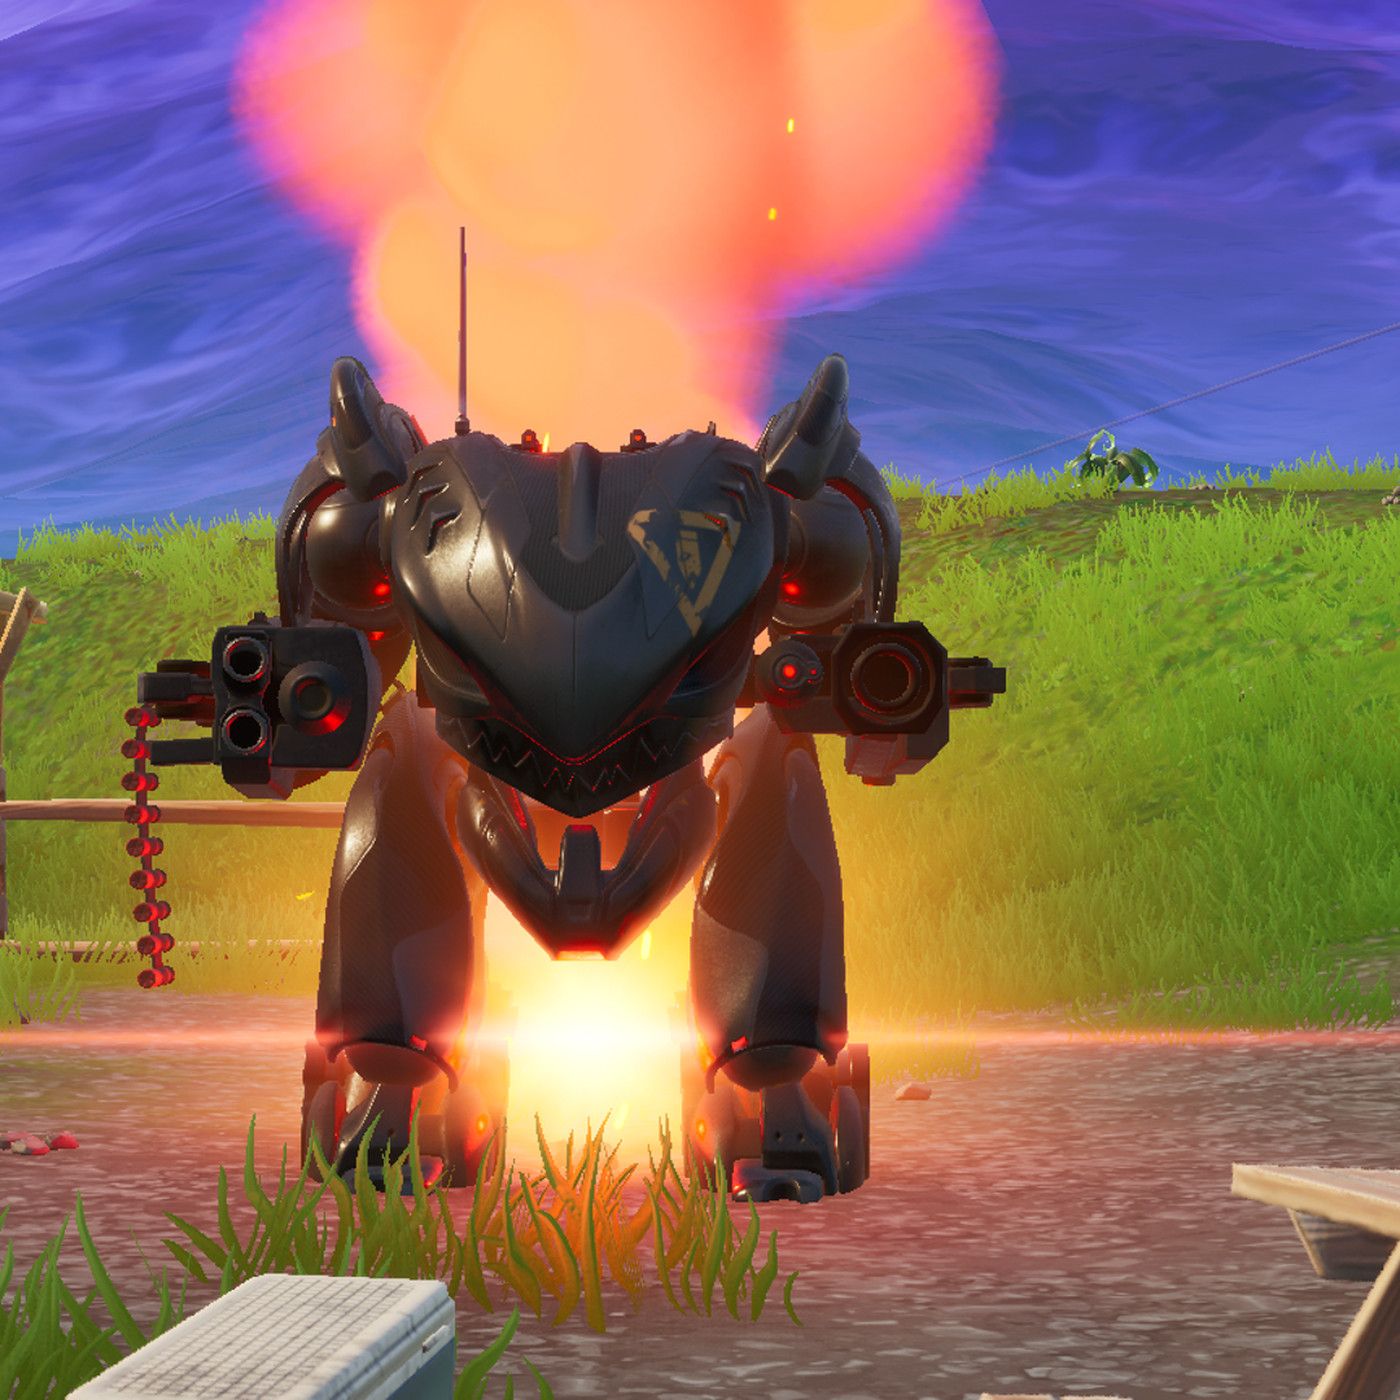 Players absolutely hate Fortnite's new mech